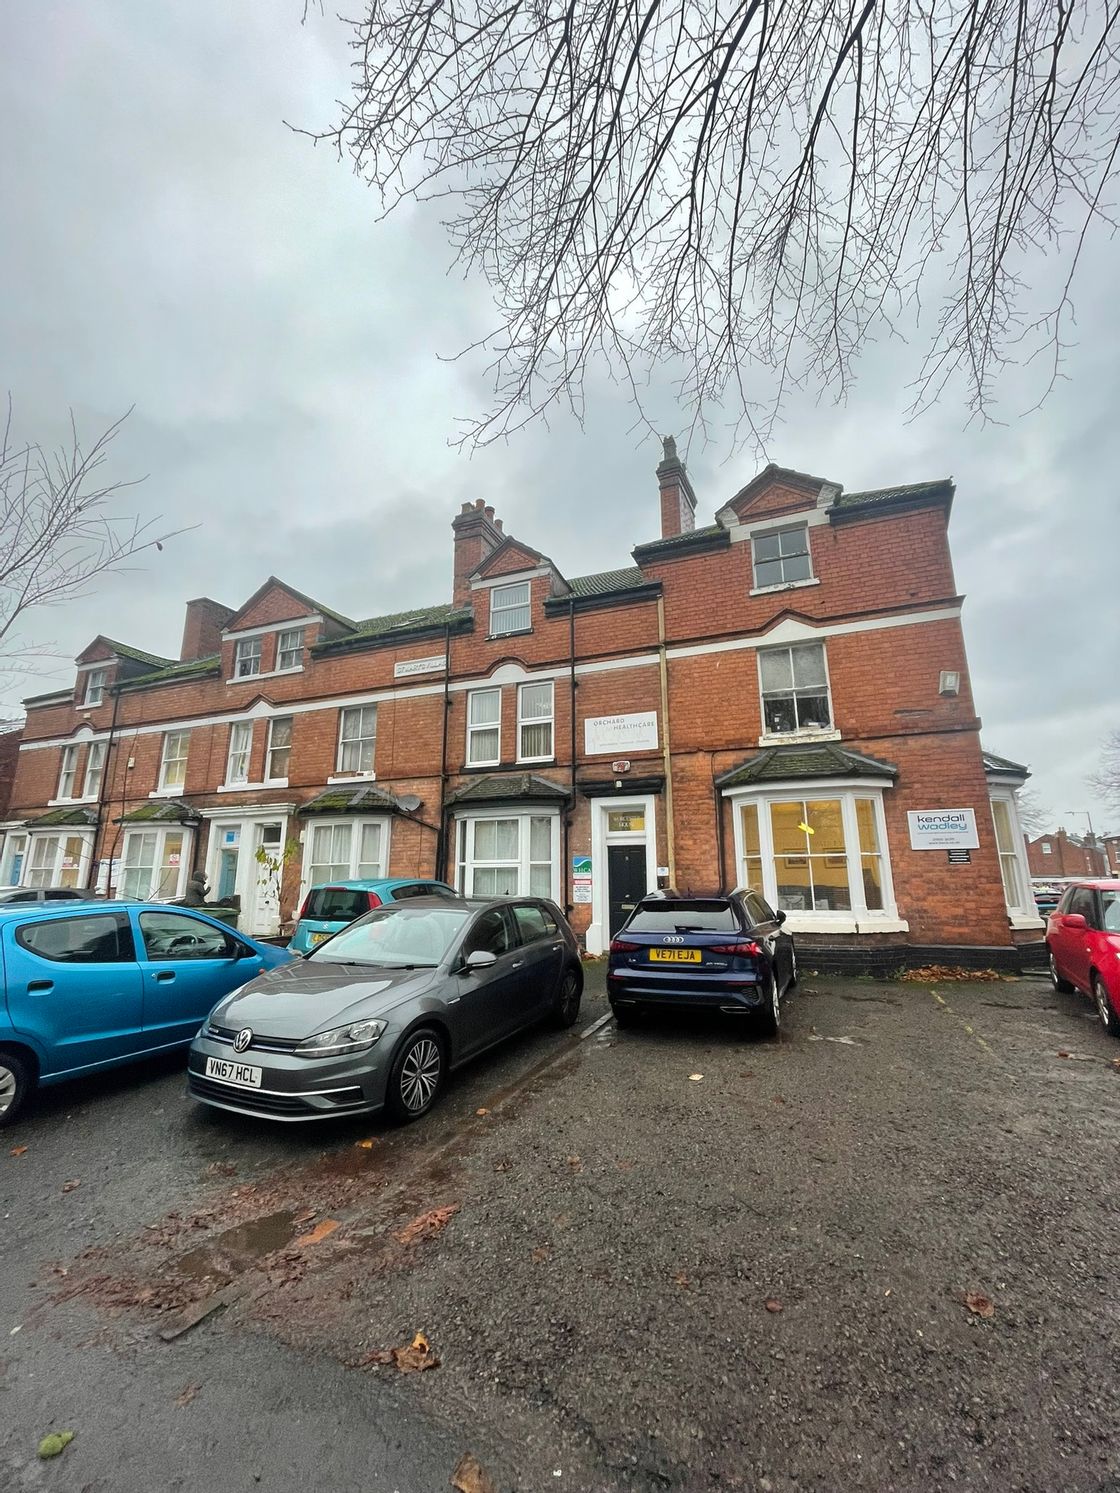 9 St Mary's Street, Worcestershire, Worcs, WR1 1HA